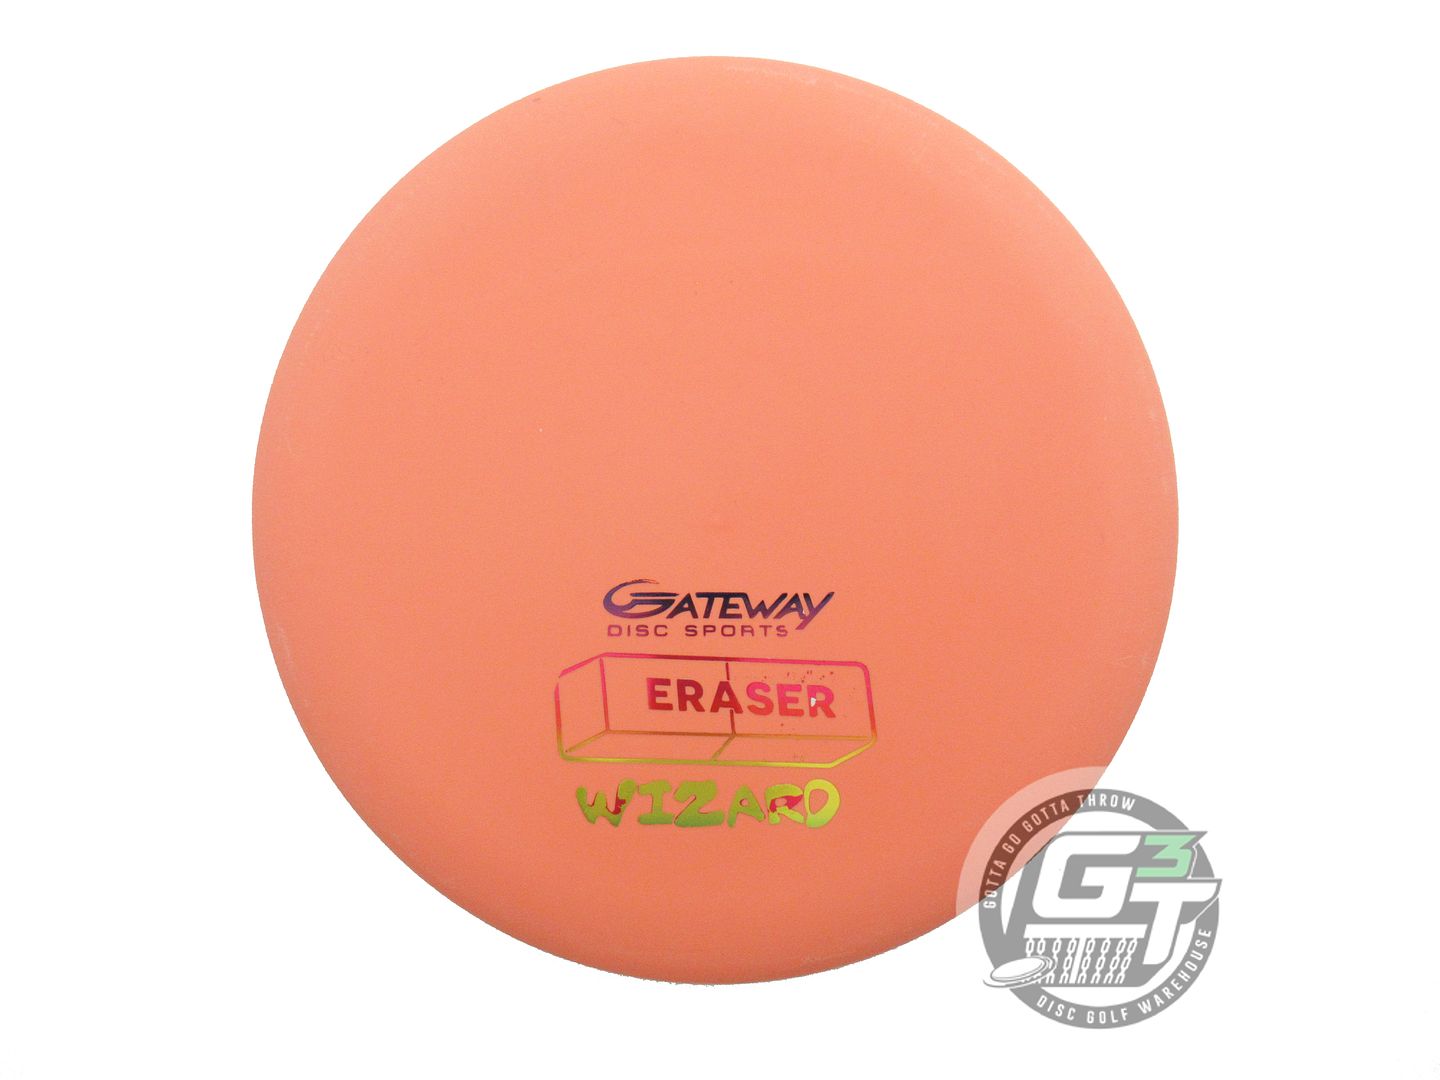 Gateway Eraser Wizard Putter Golf Disc (Individually Listed)